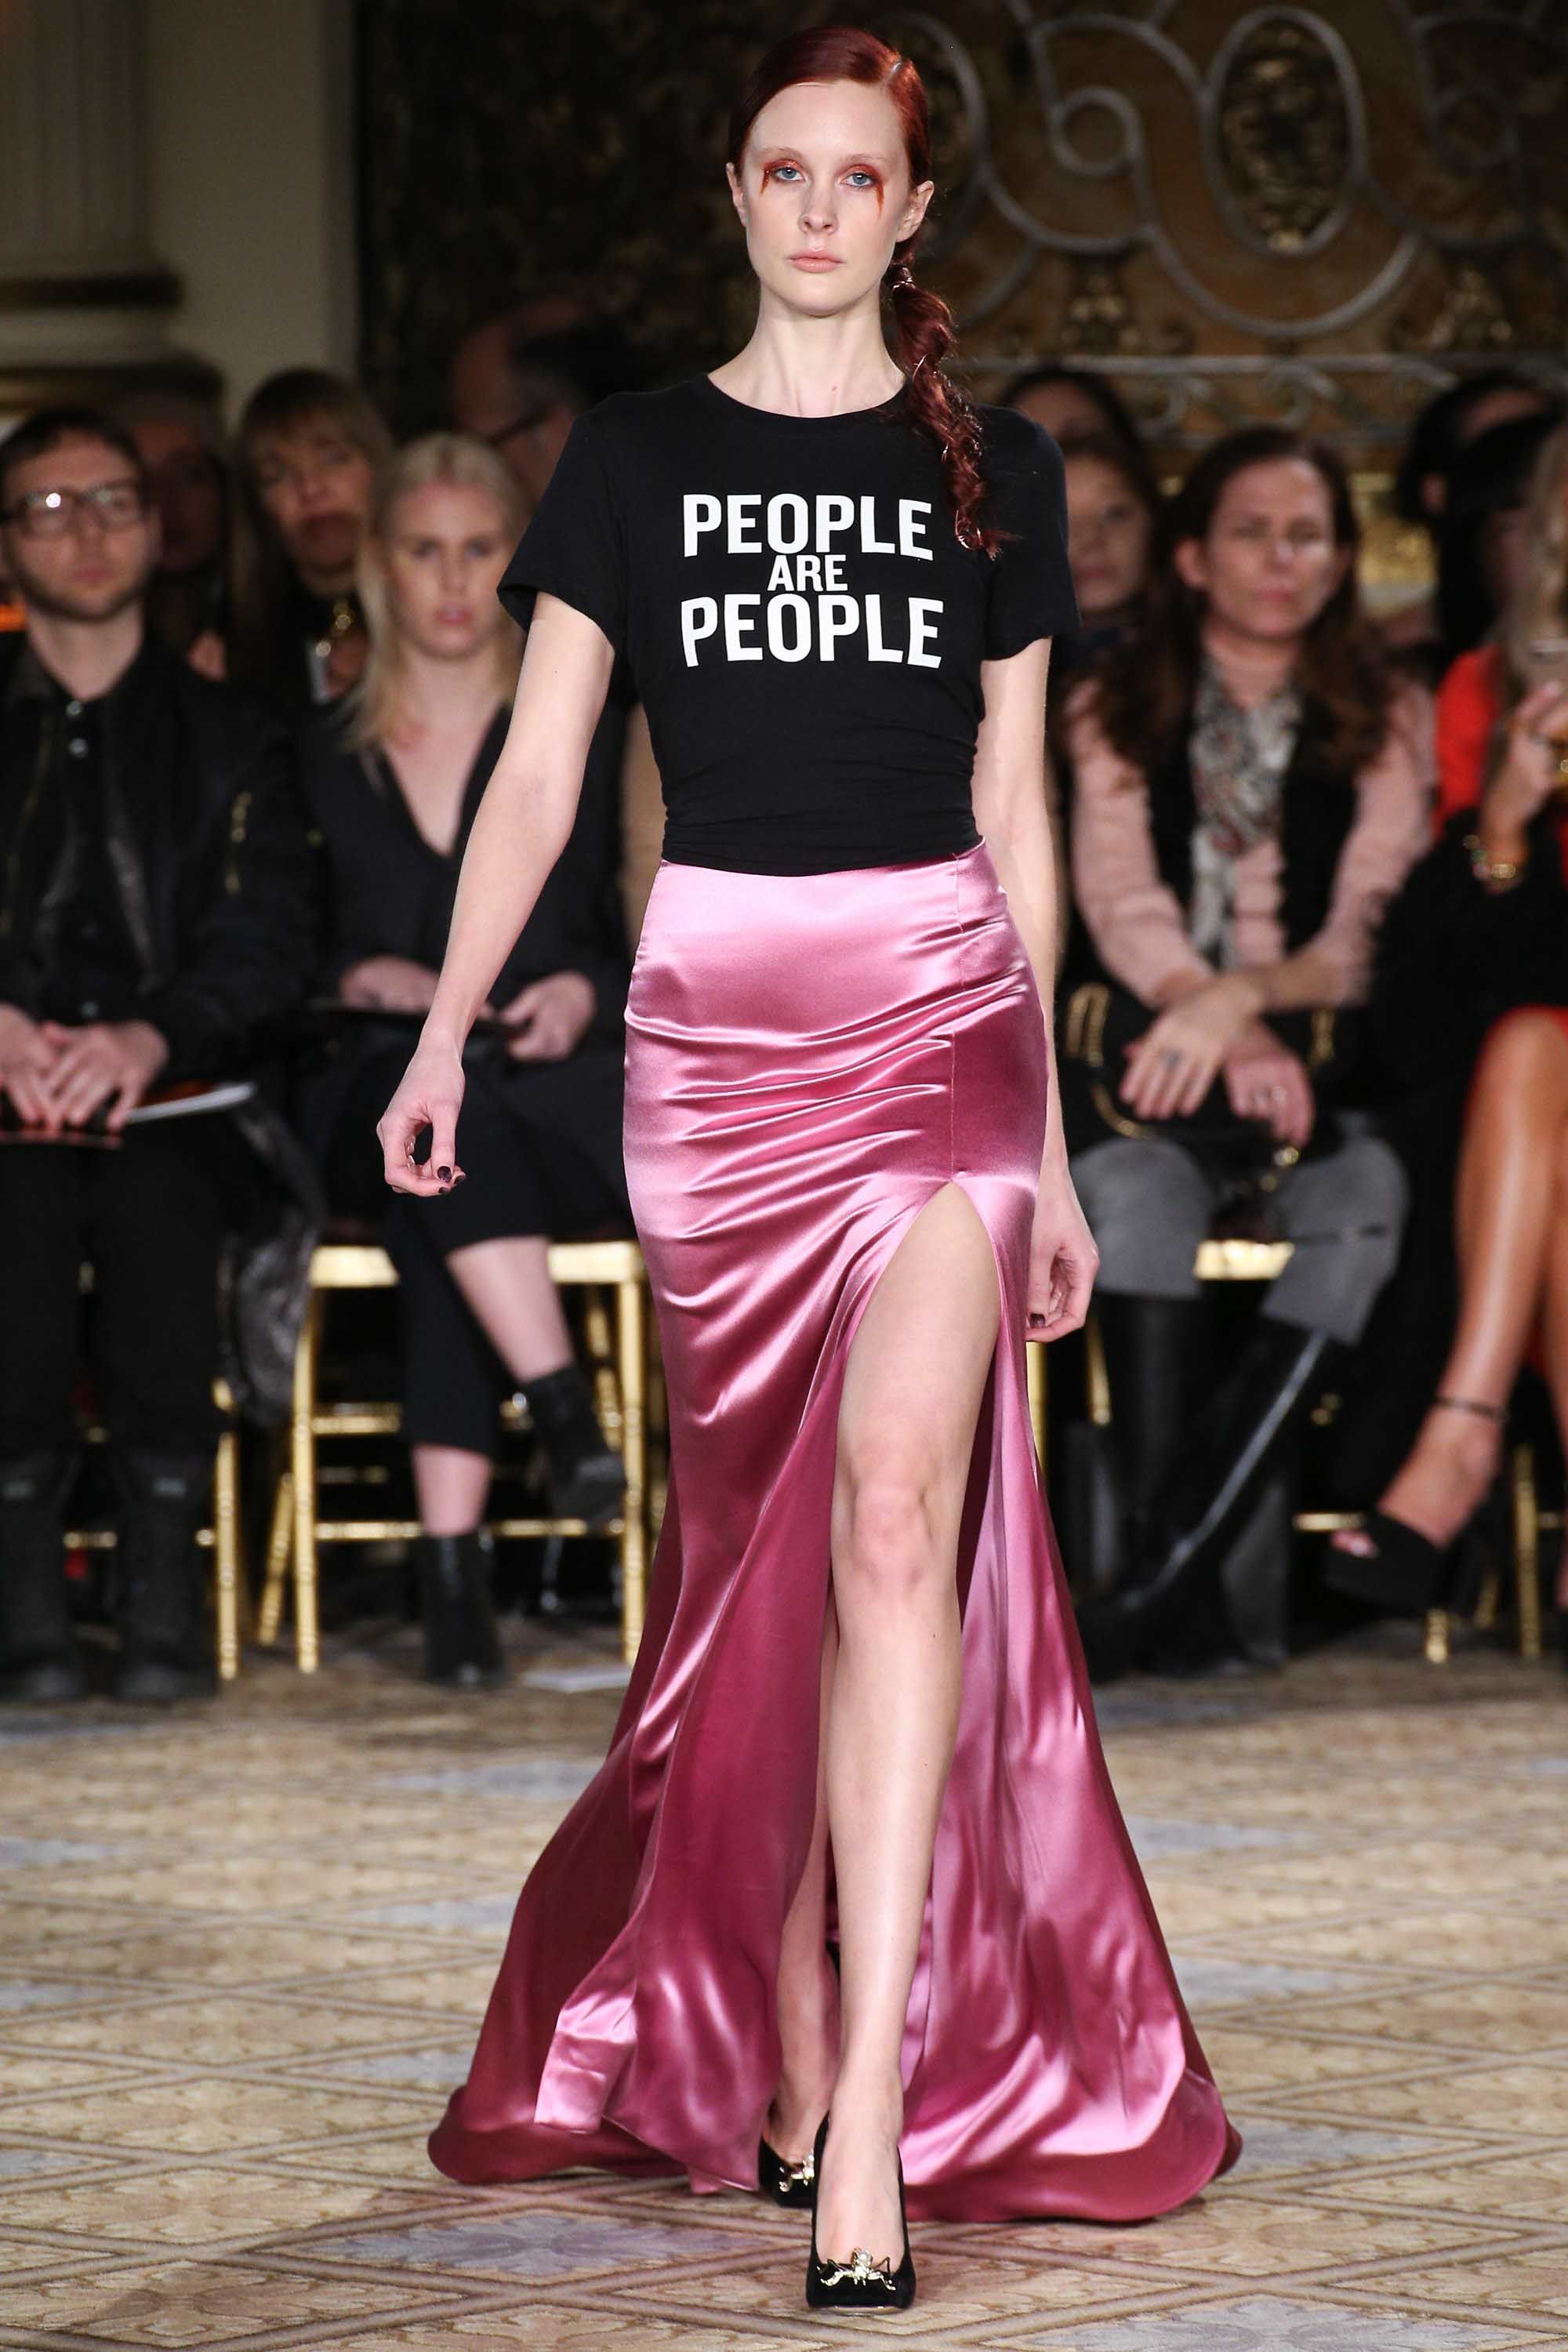 Sneaky!  This is a dress that smells like political issues at this year's fashion week